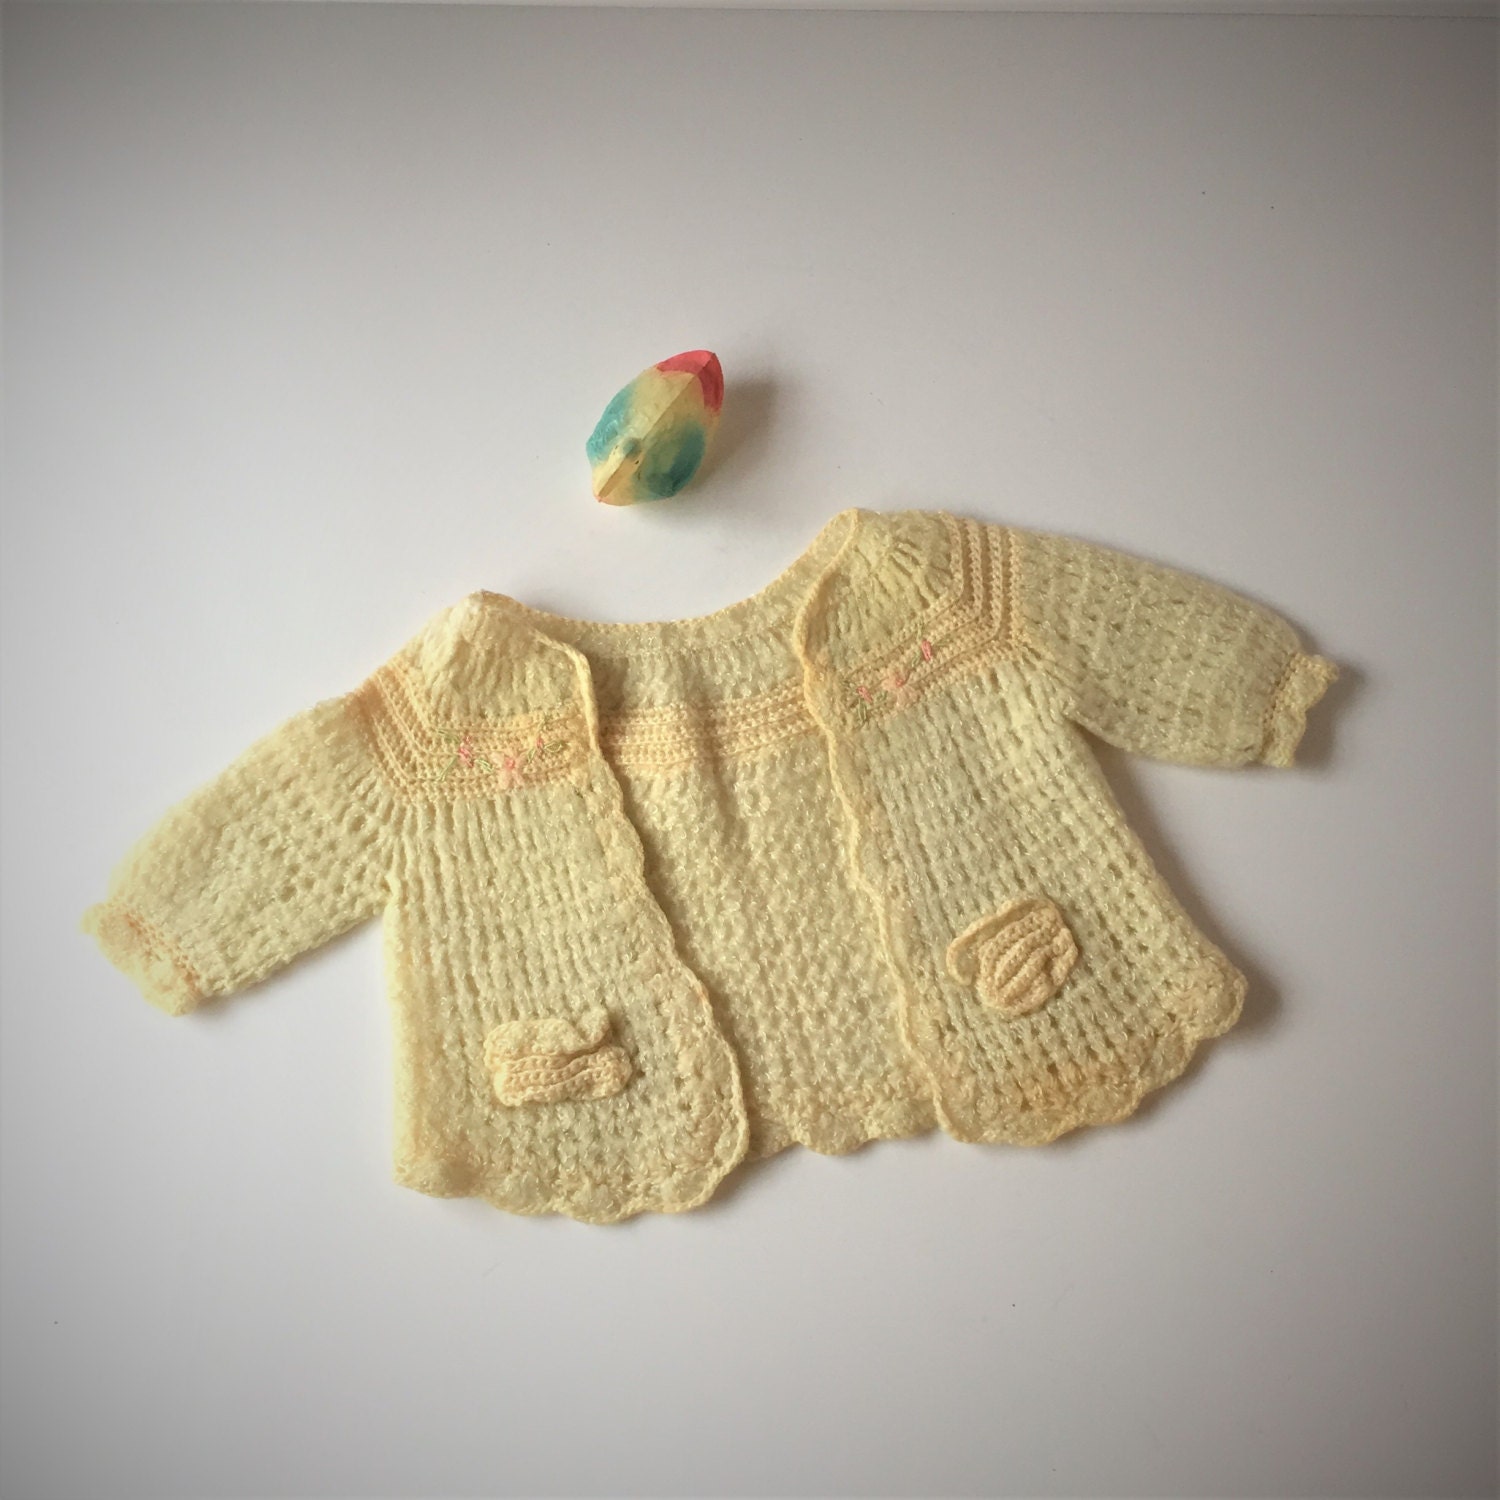 Vintage Baby Clothes 1940s Baby Girl Sweater Crochet Baby